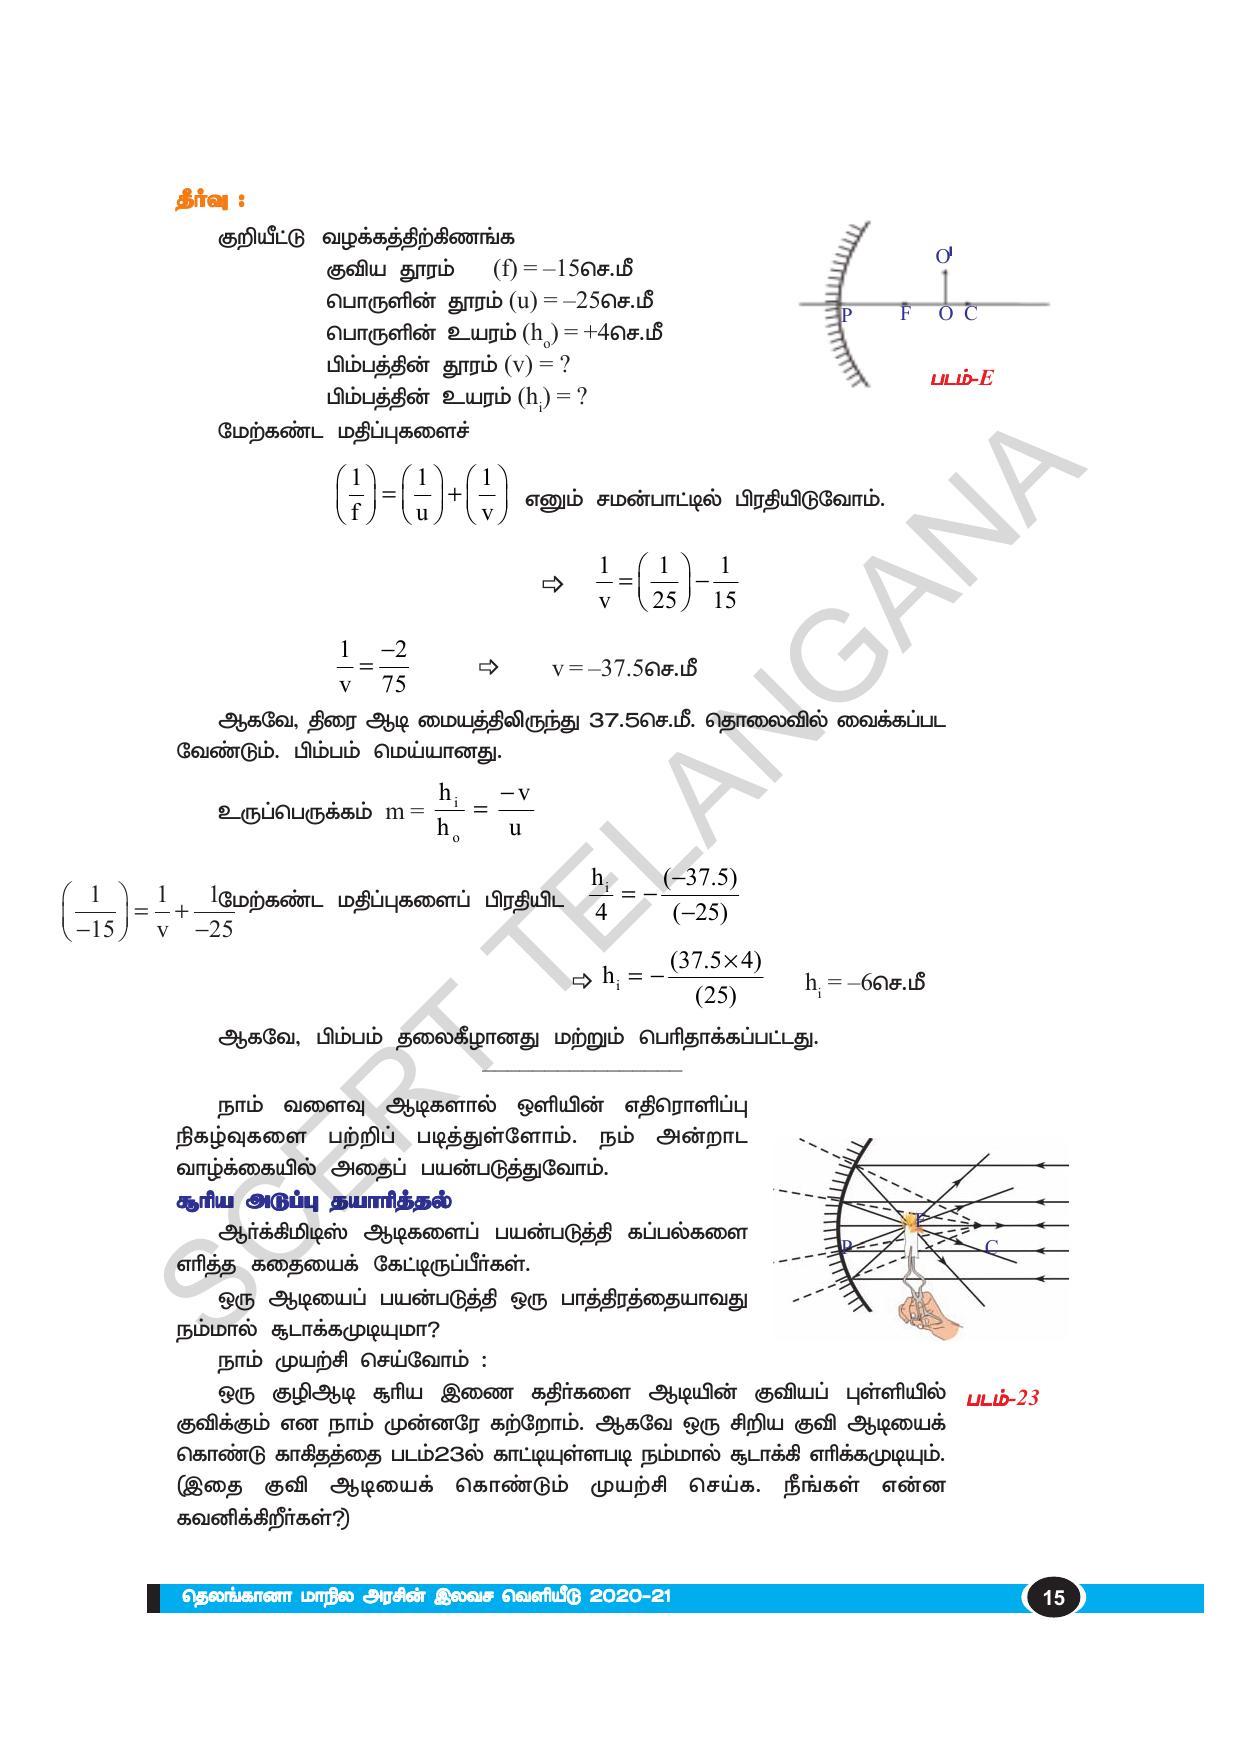 TS SCERT Class 10 Physical Science(Tamil Medium) Text Book - Page 27